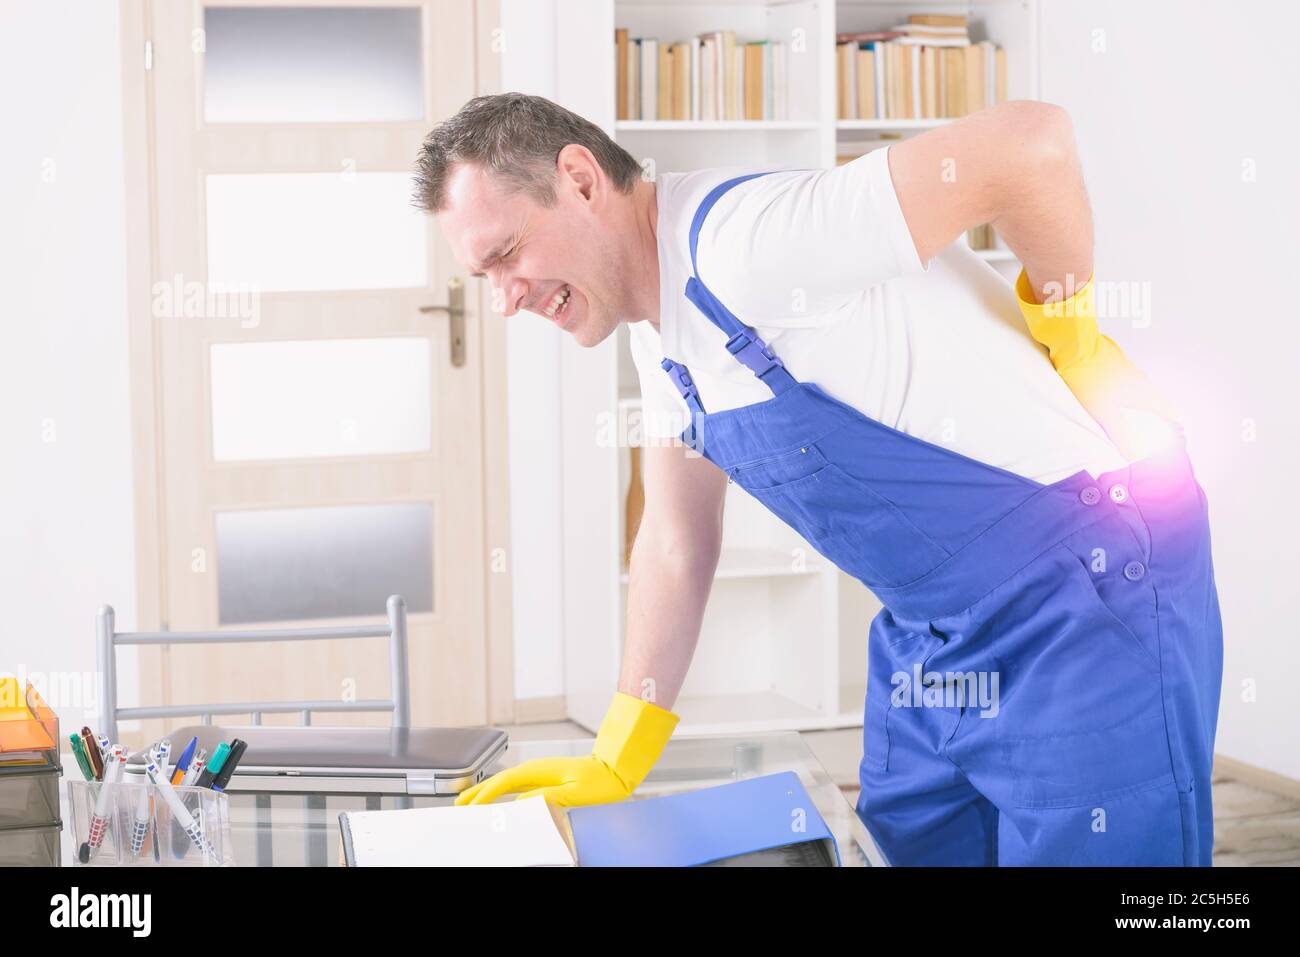 Man worker with back injury, concept of accident at work Stock Photo